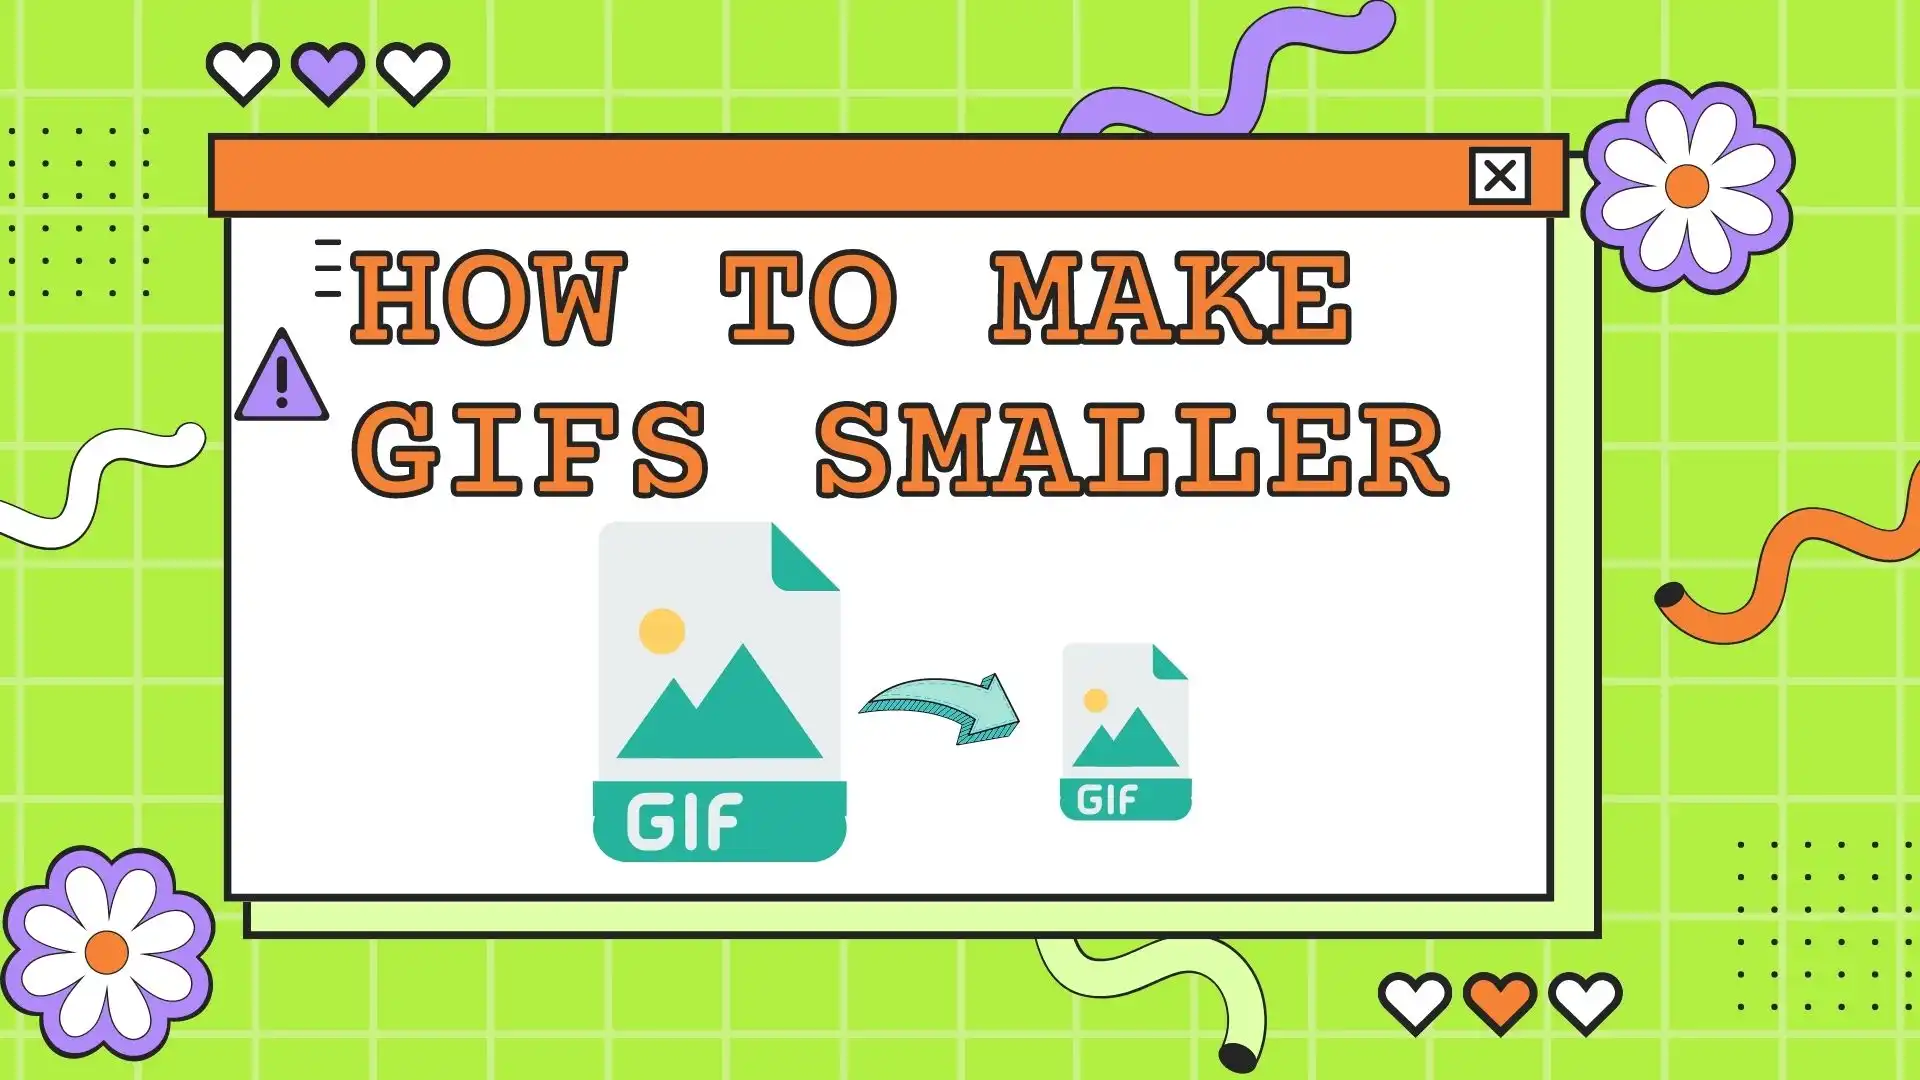 Free online tools to create animated GIF files